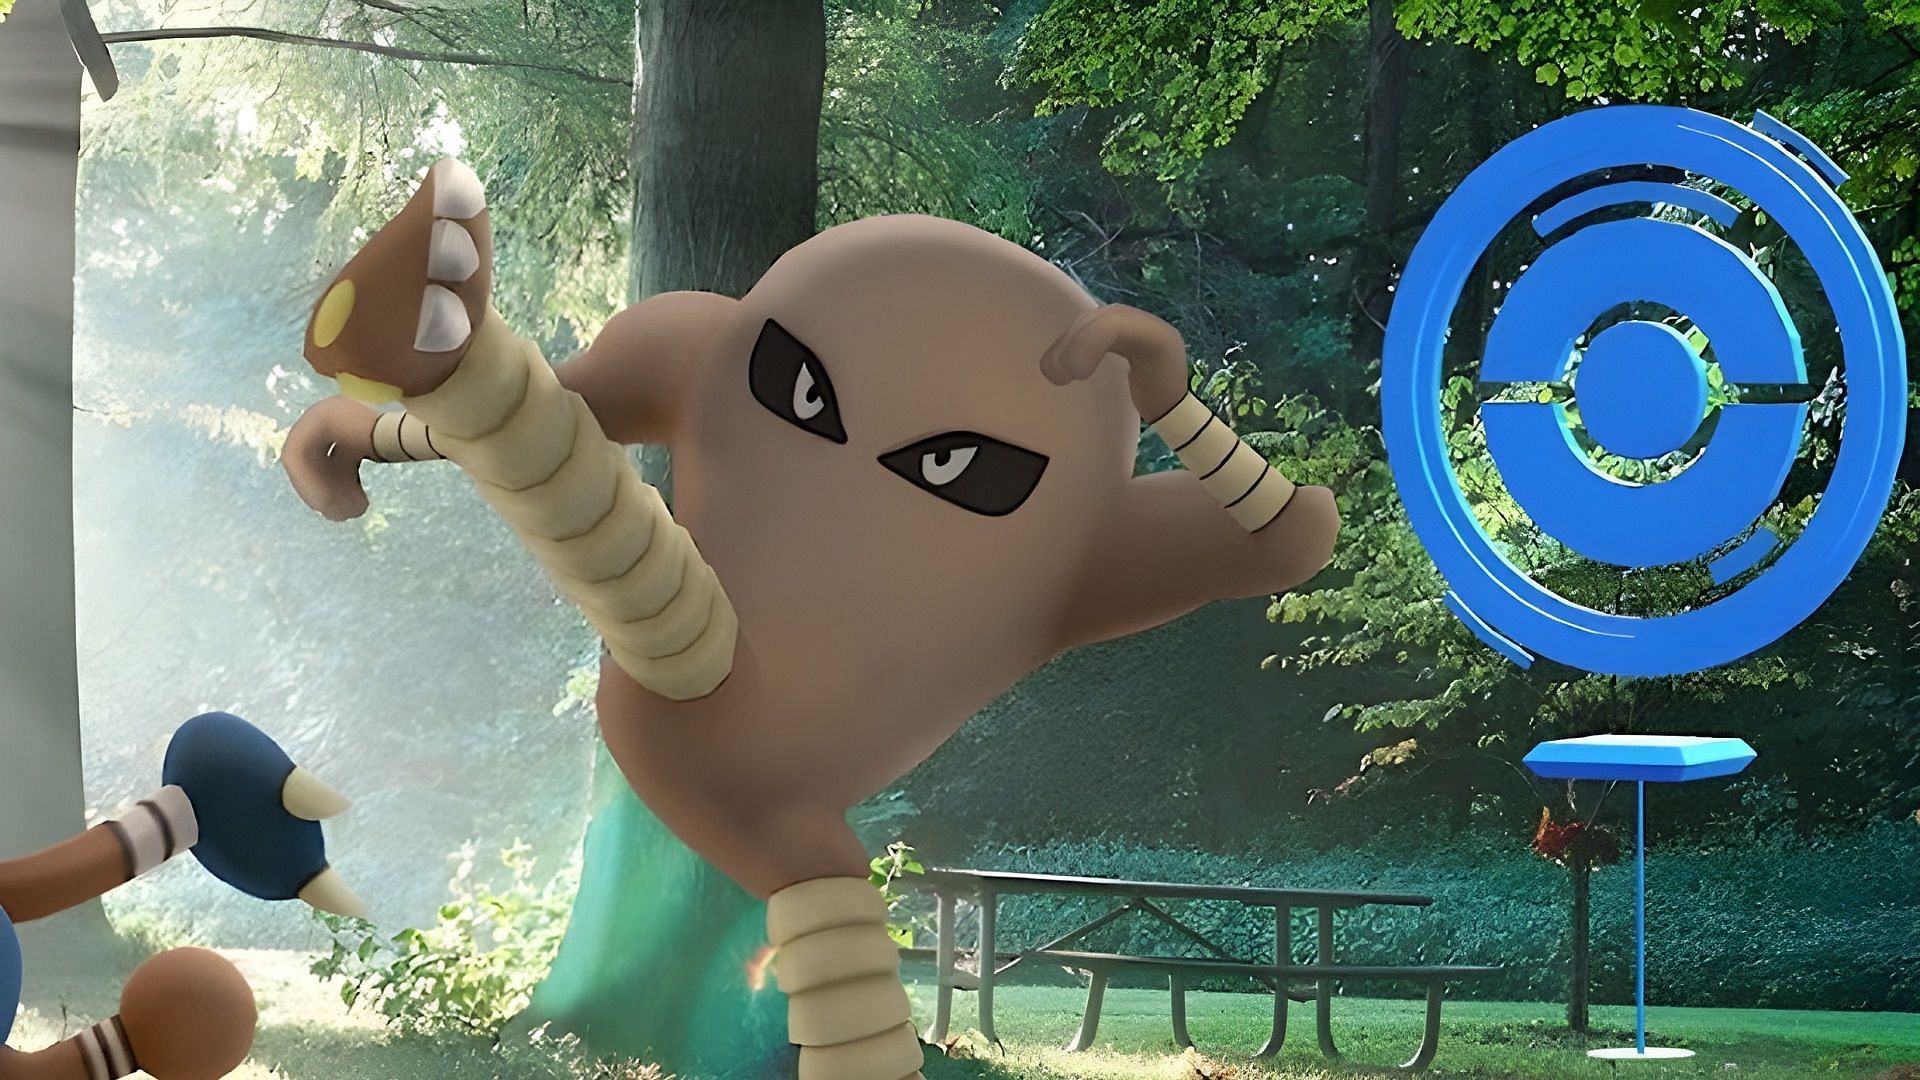 Hitmonlee can be obtained in many different ways in Pokemon GO (Image via Niantic)